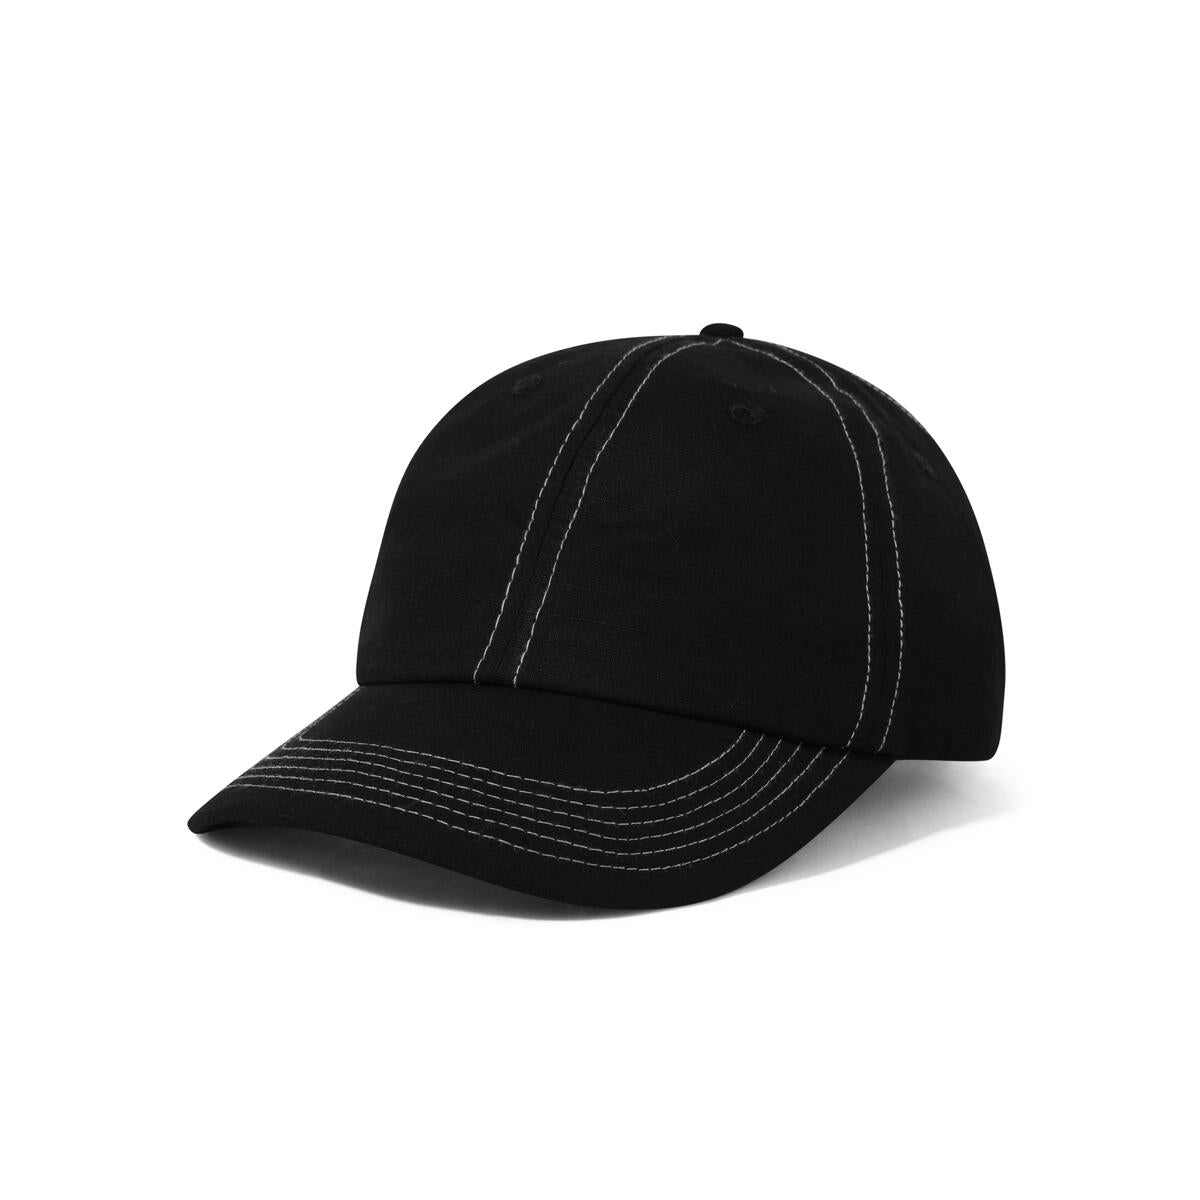 Butter Goods Washed Ripstop 6 Panel Cap - Black